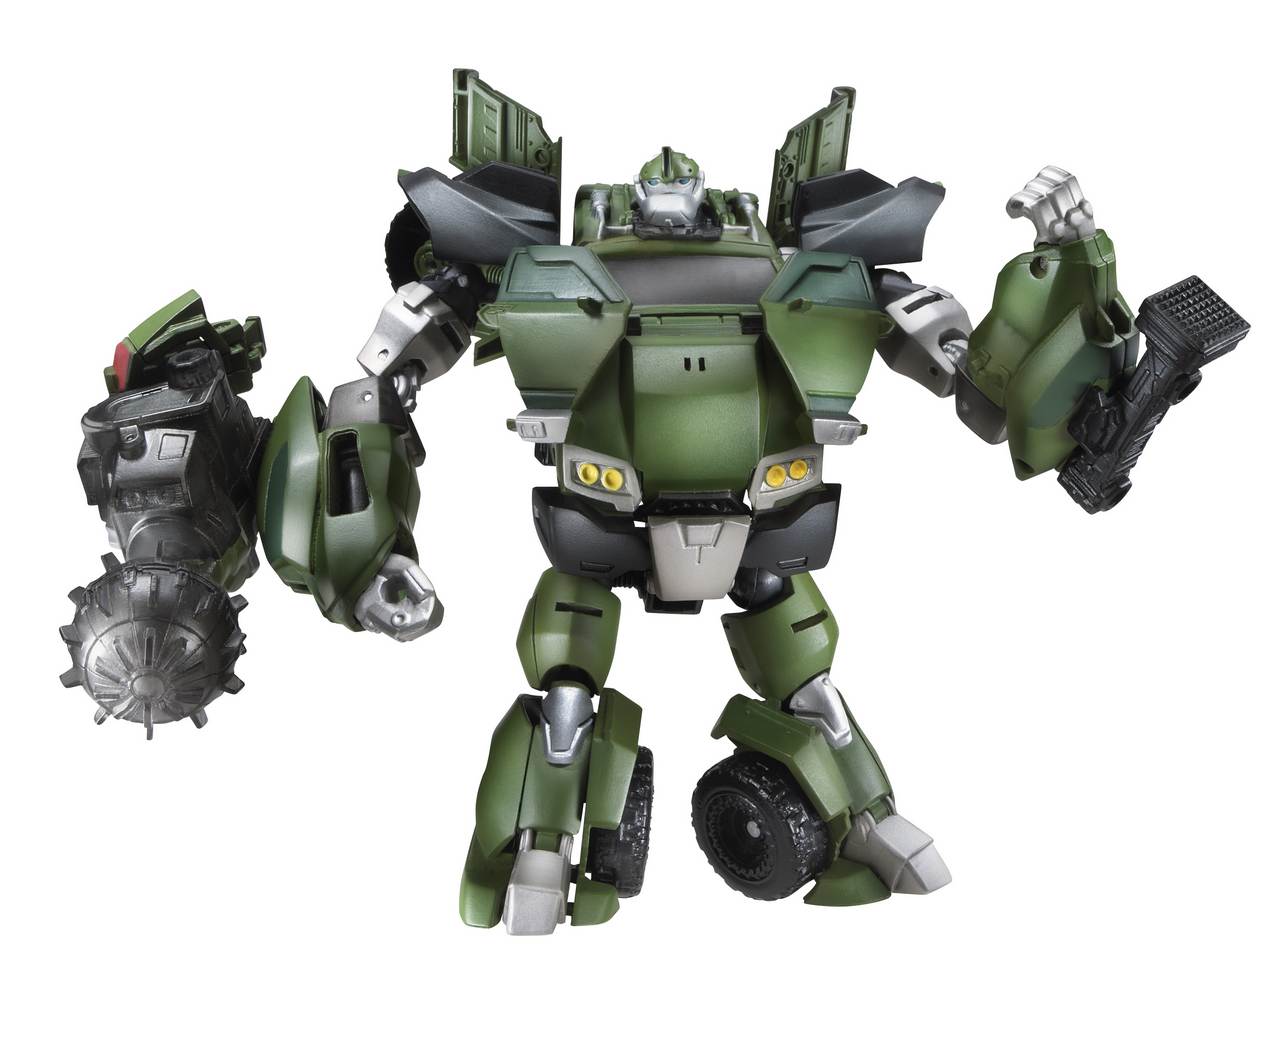 Transformers Prime Robots in Disguise Mainline Official Image